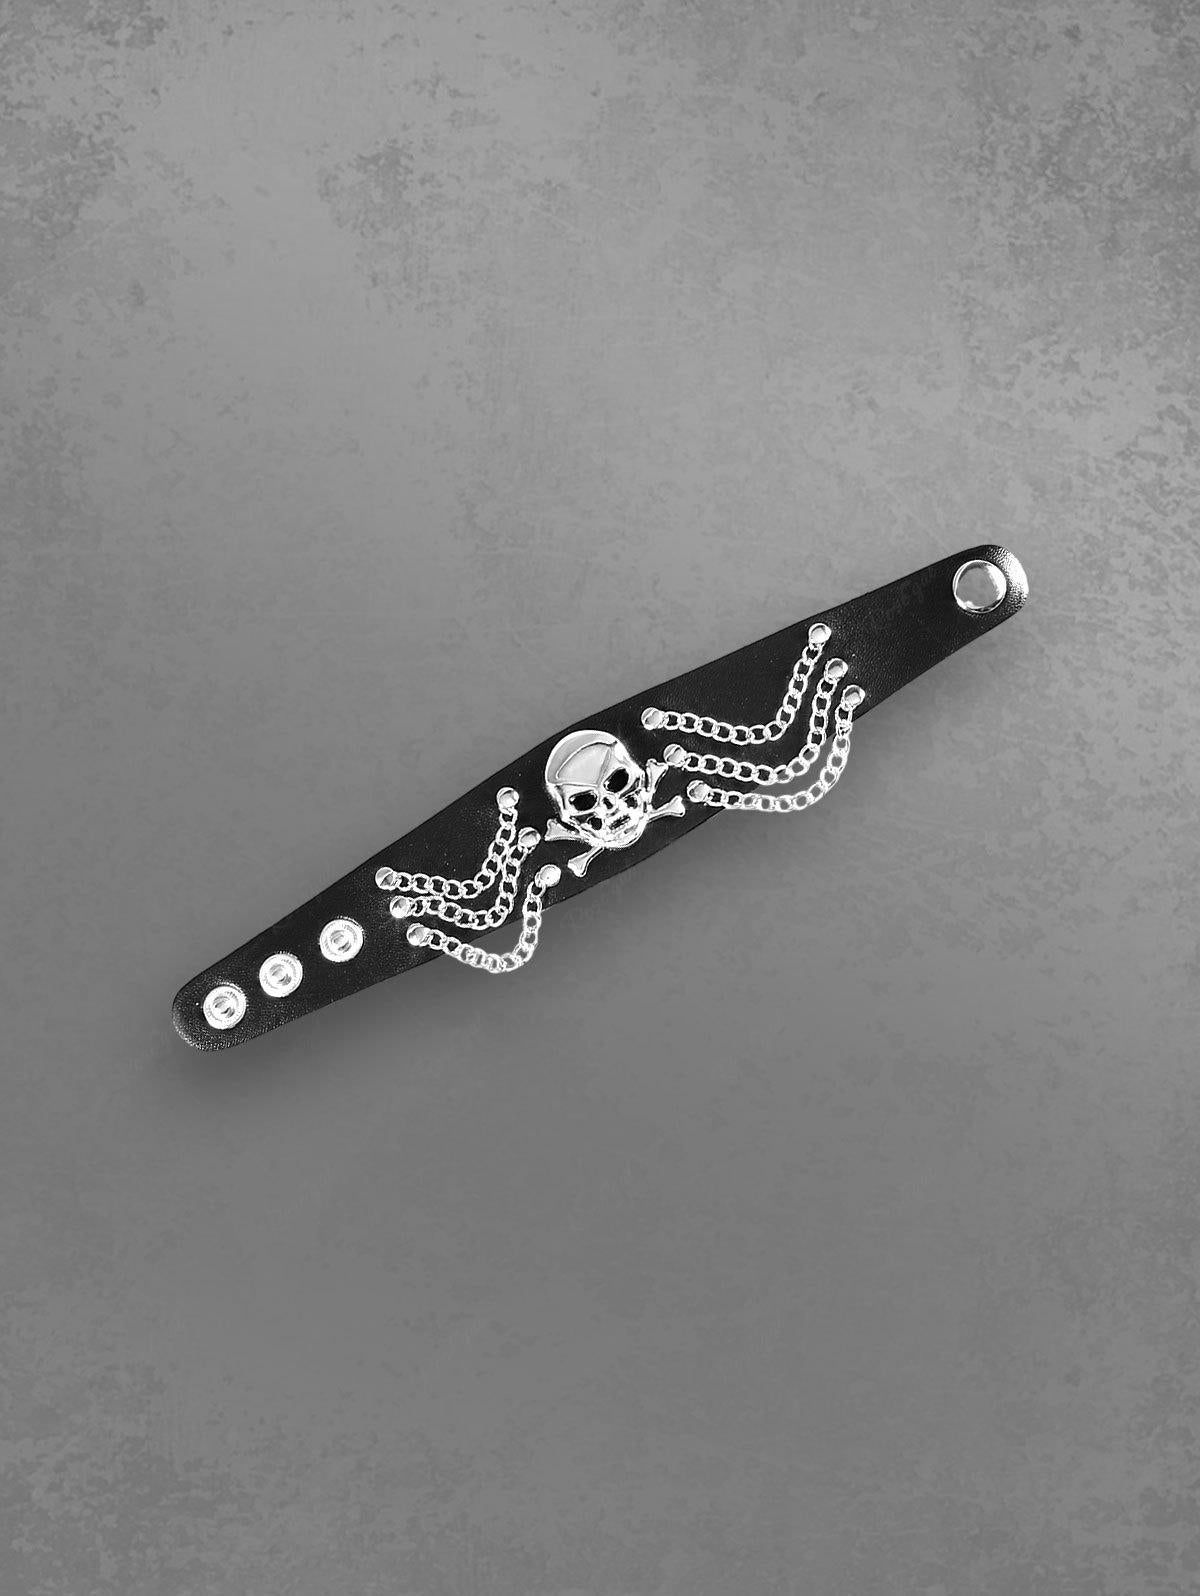 Black Skull Rivets Rings Handcuff Gothic Punk Chain Faux Leather Accessories